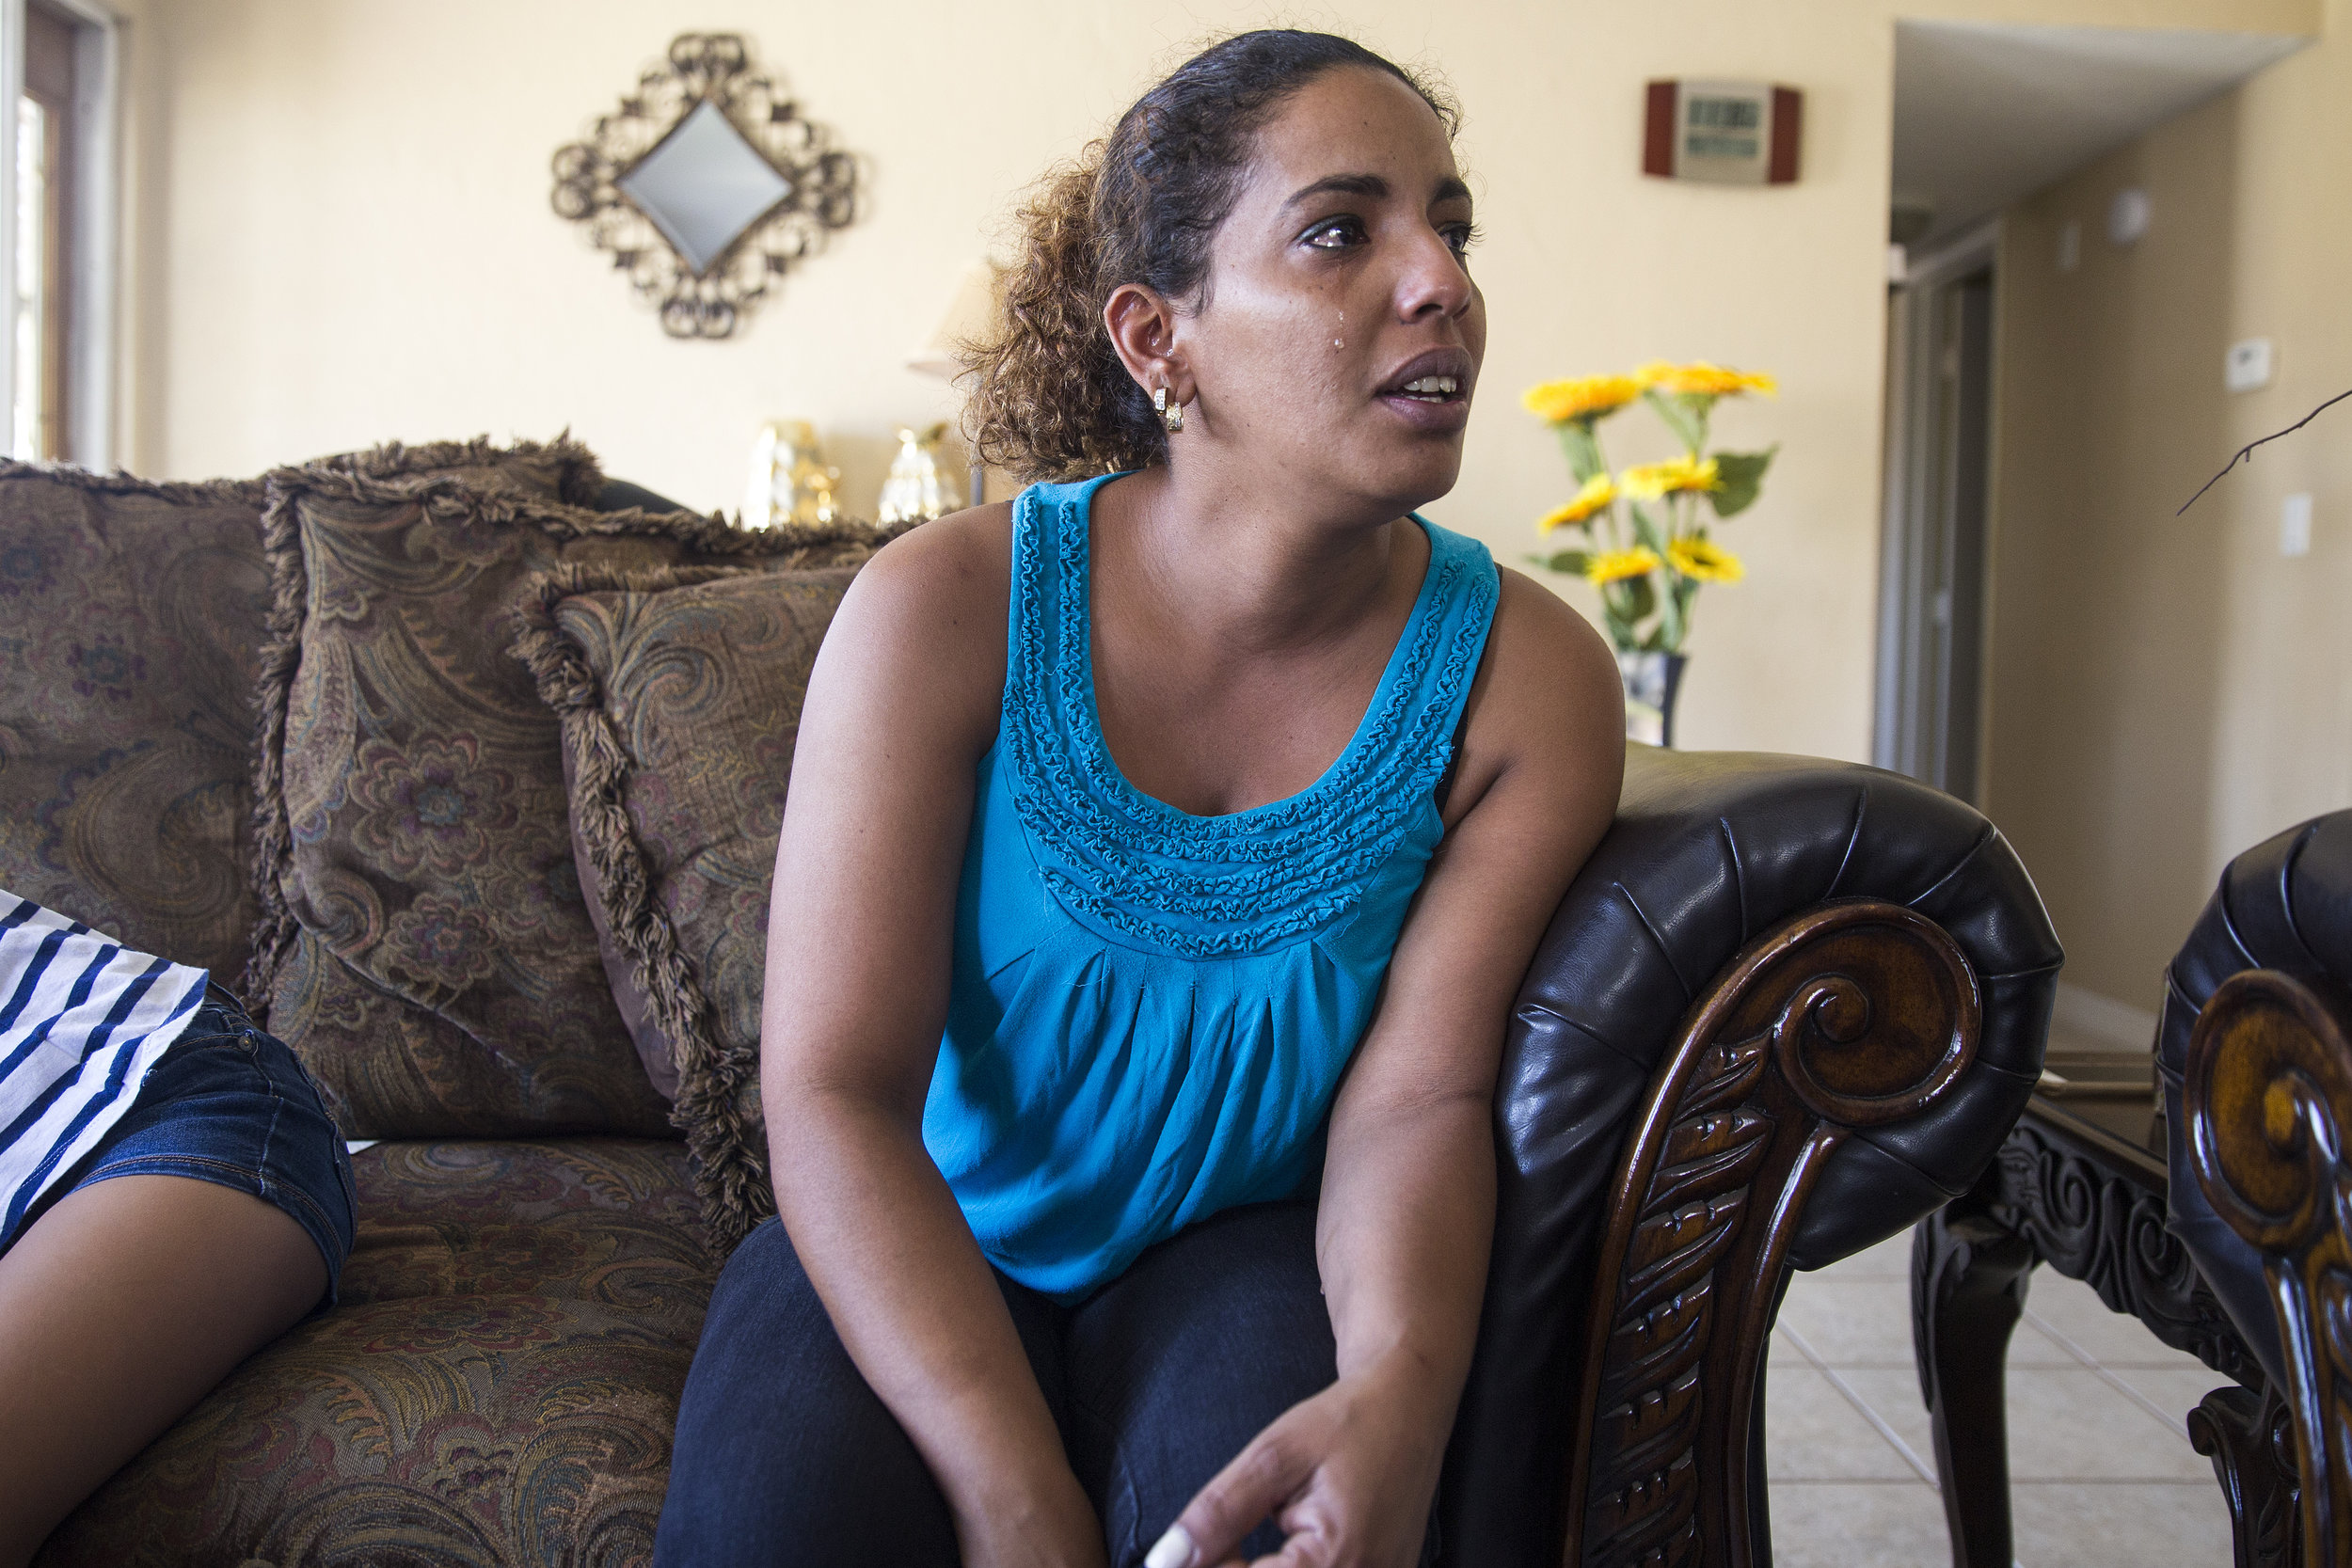  Lidicis Garcia Villafaña cries while remembering her partner of 14 years, Yusdel Moreno Iglesias, who died of a suspected carbon monoxide poisoning this past week. 